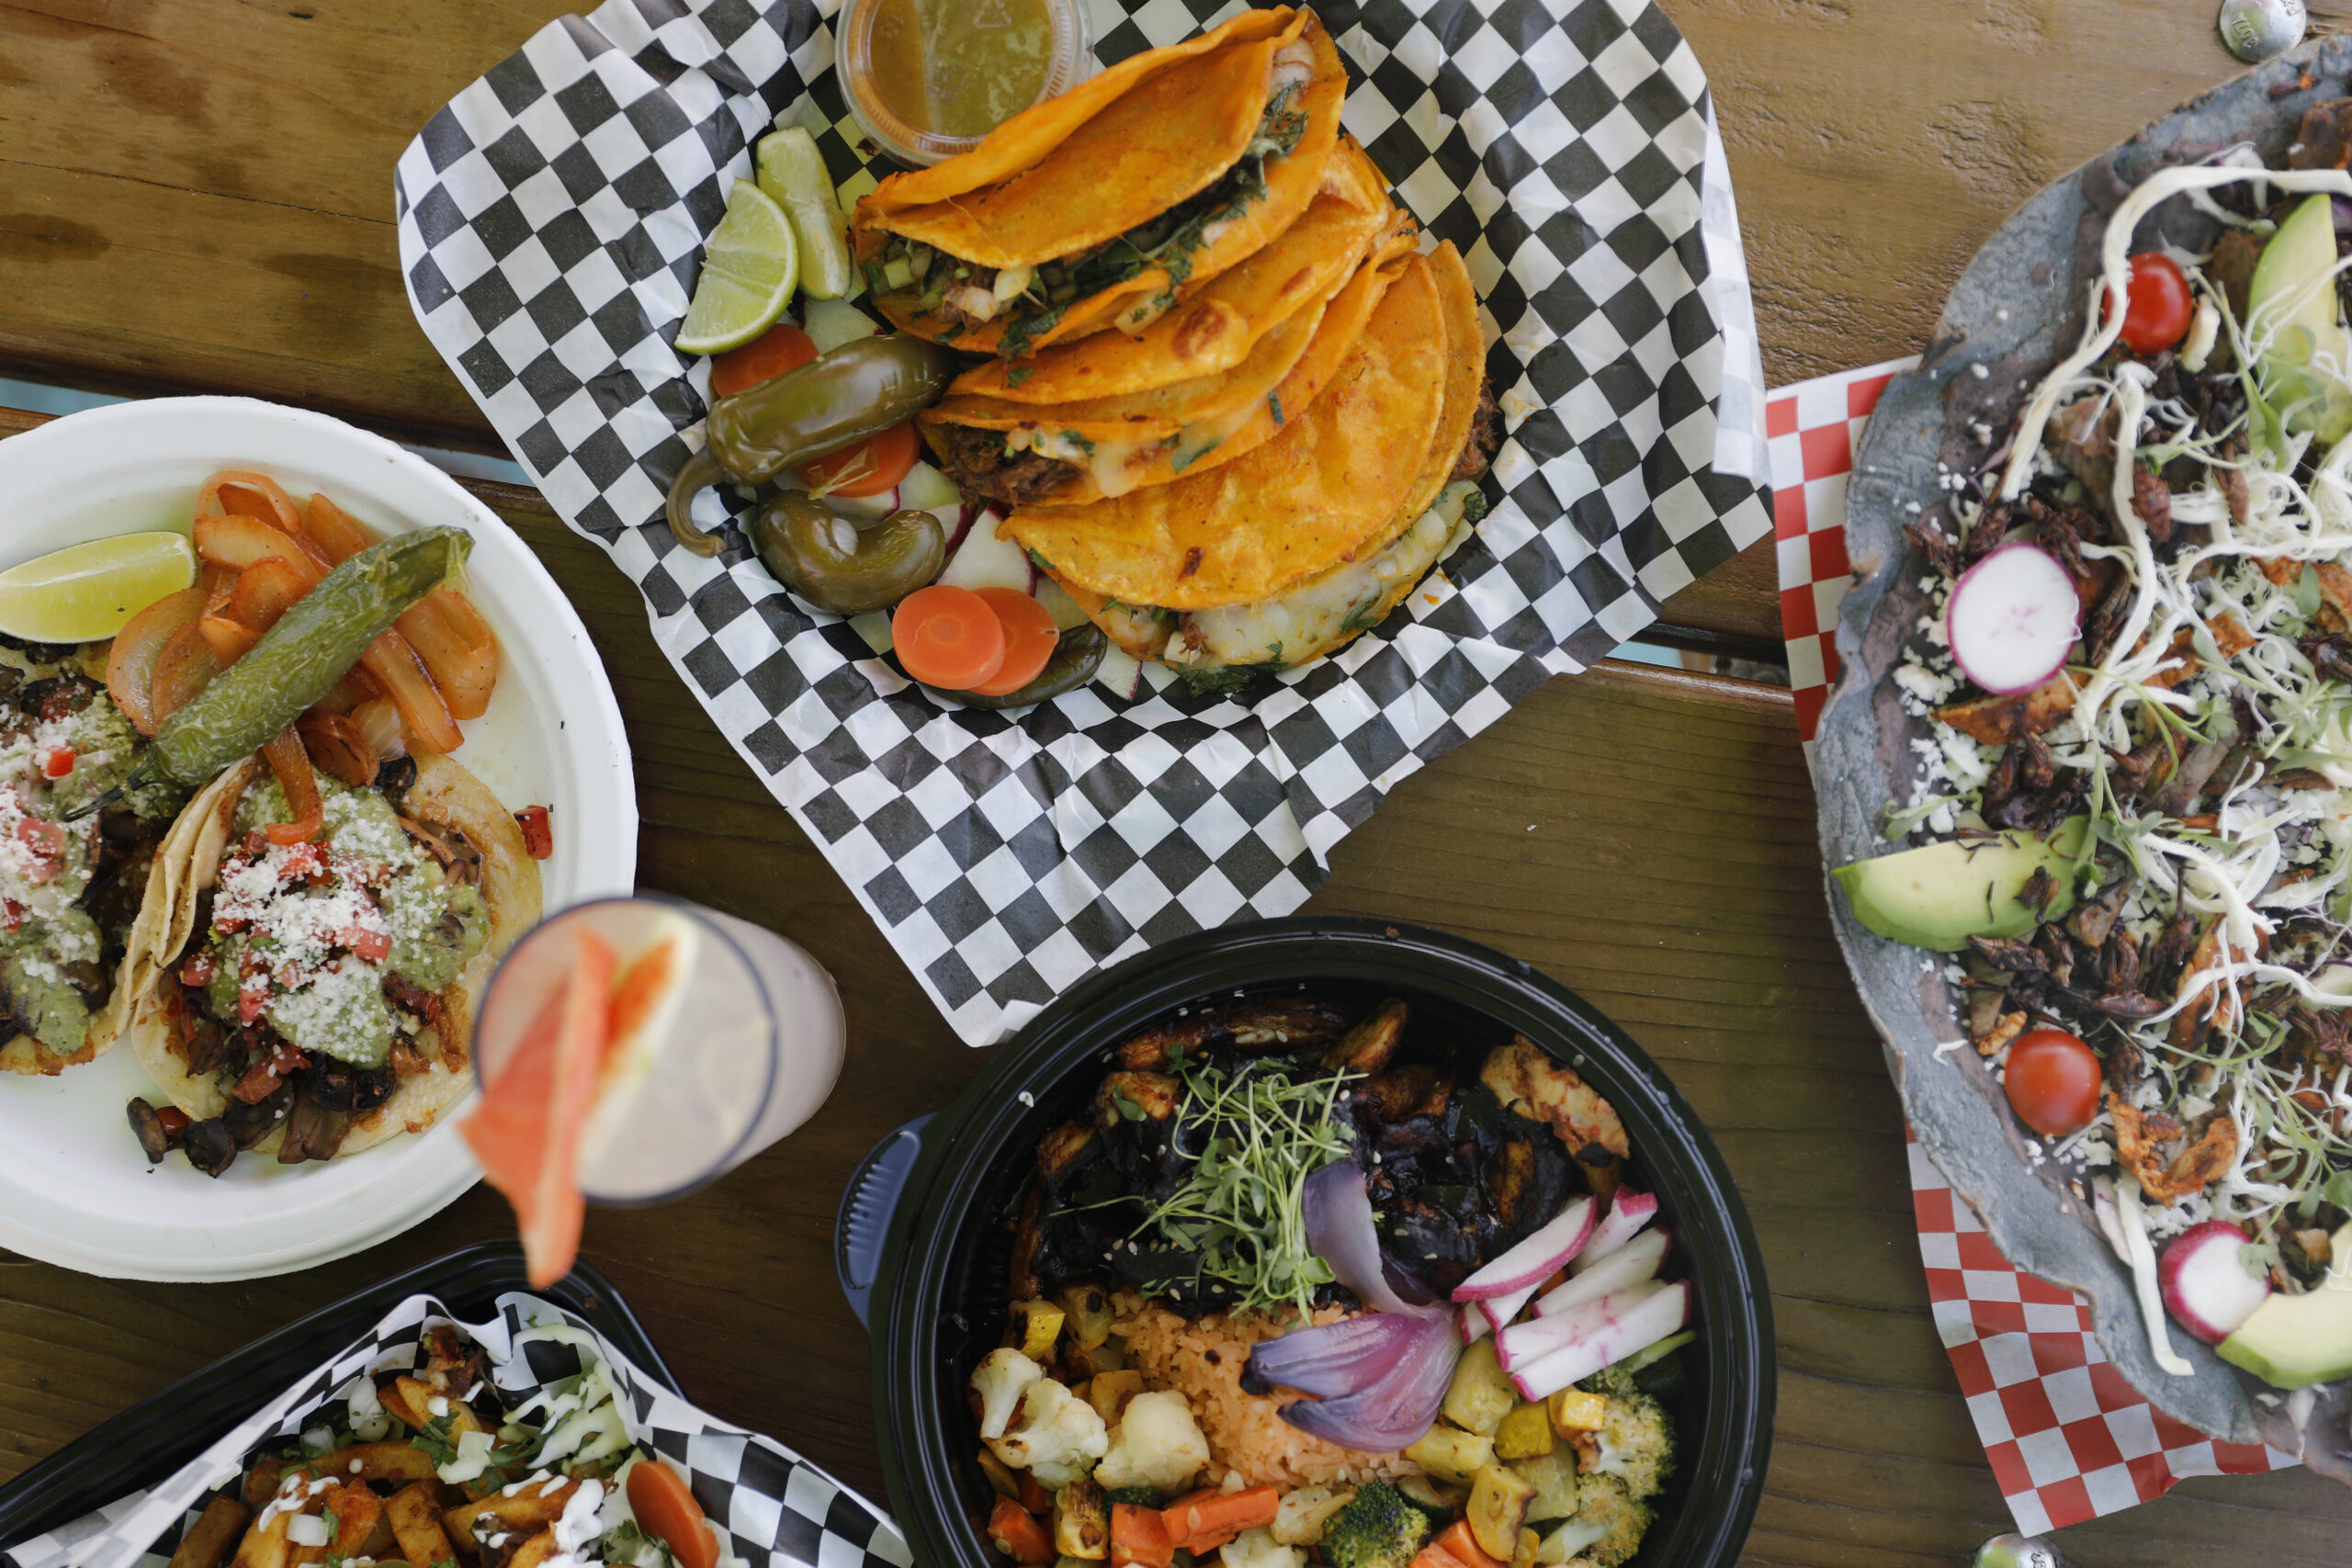 A variety of Mexican dishes served at the Mitote Food Park in Santa Rosa. (Beth Schlanker/The Press Democrat)